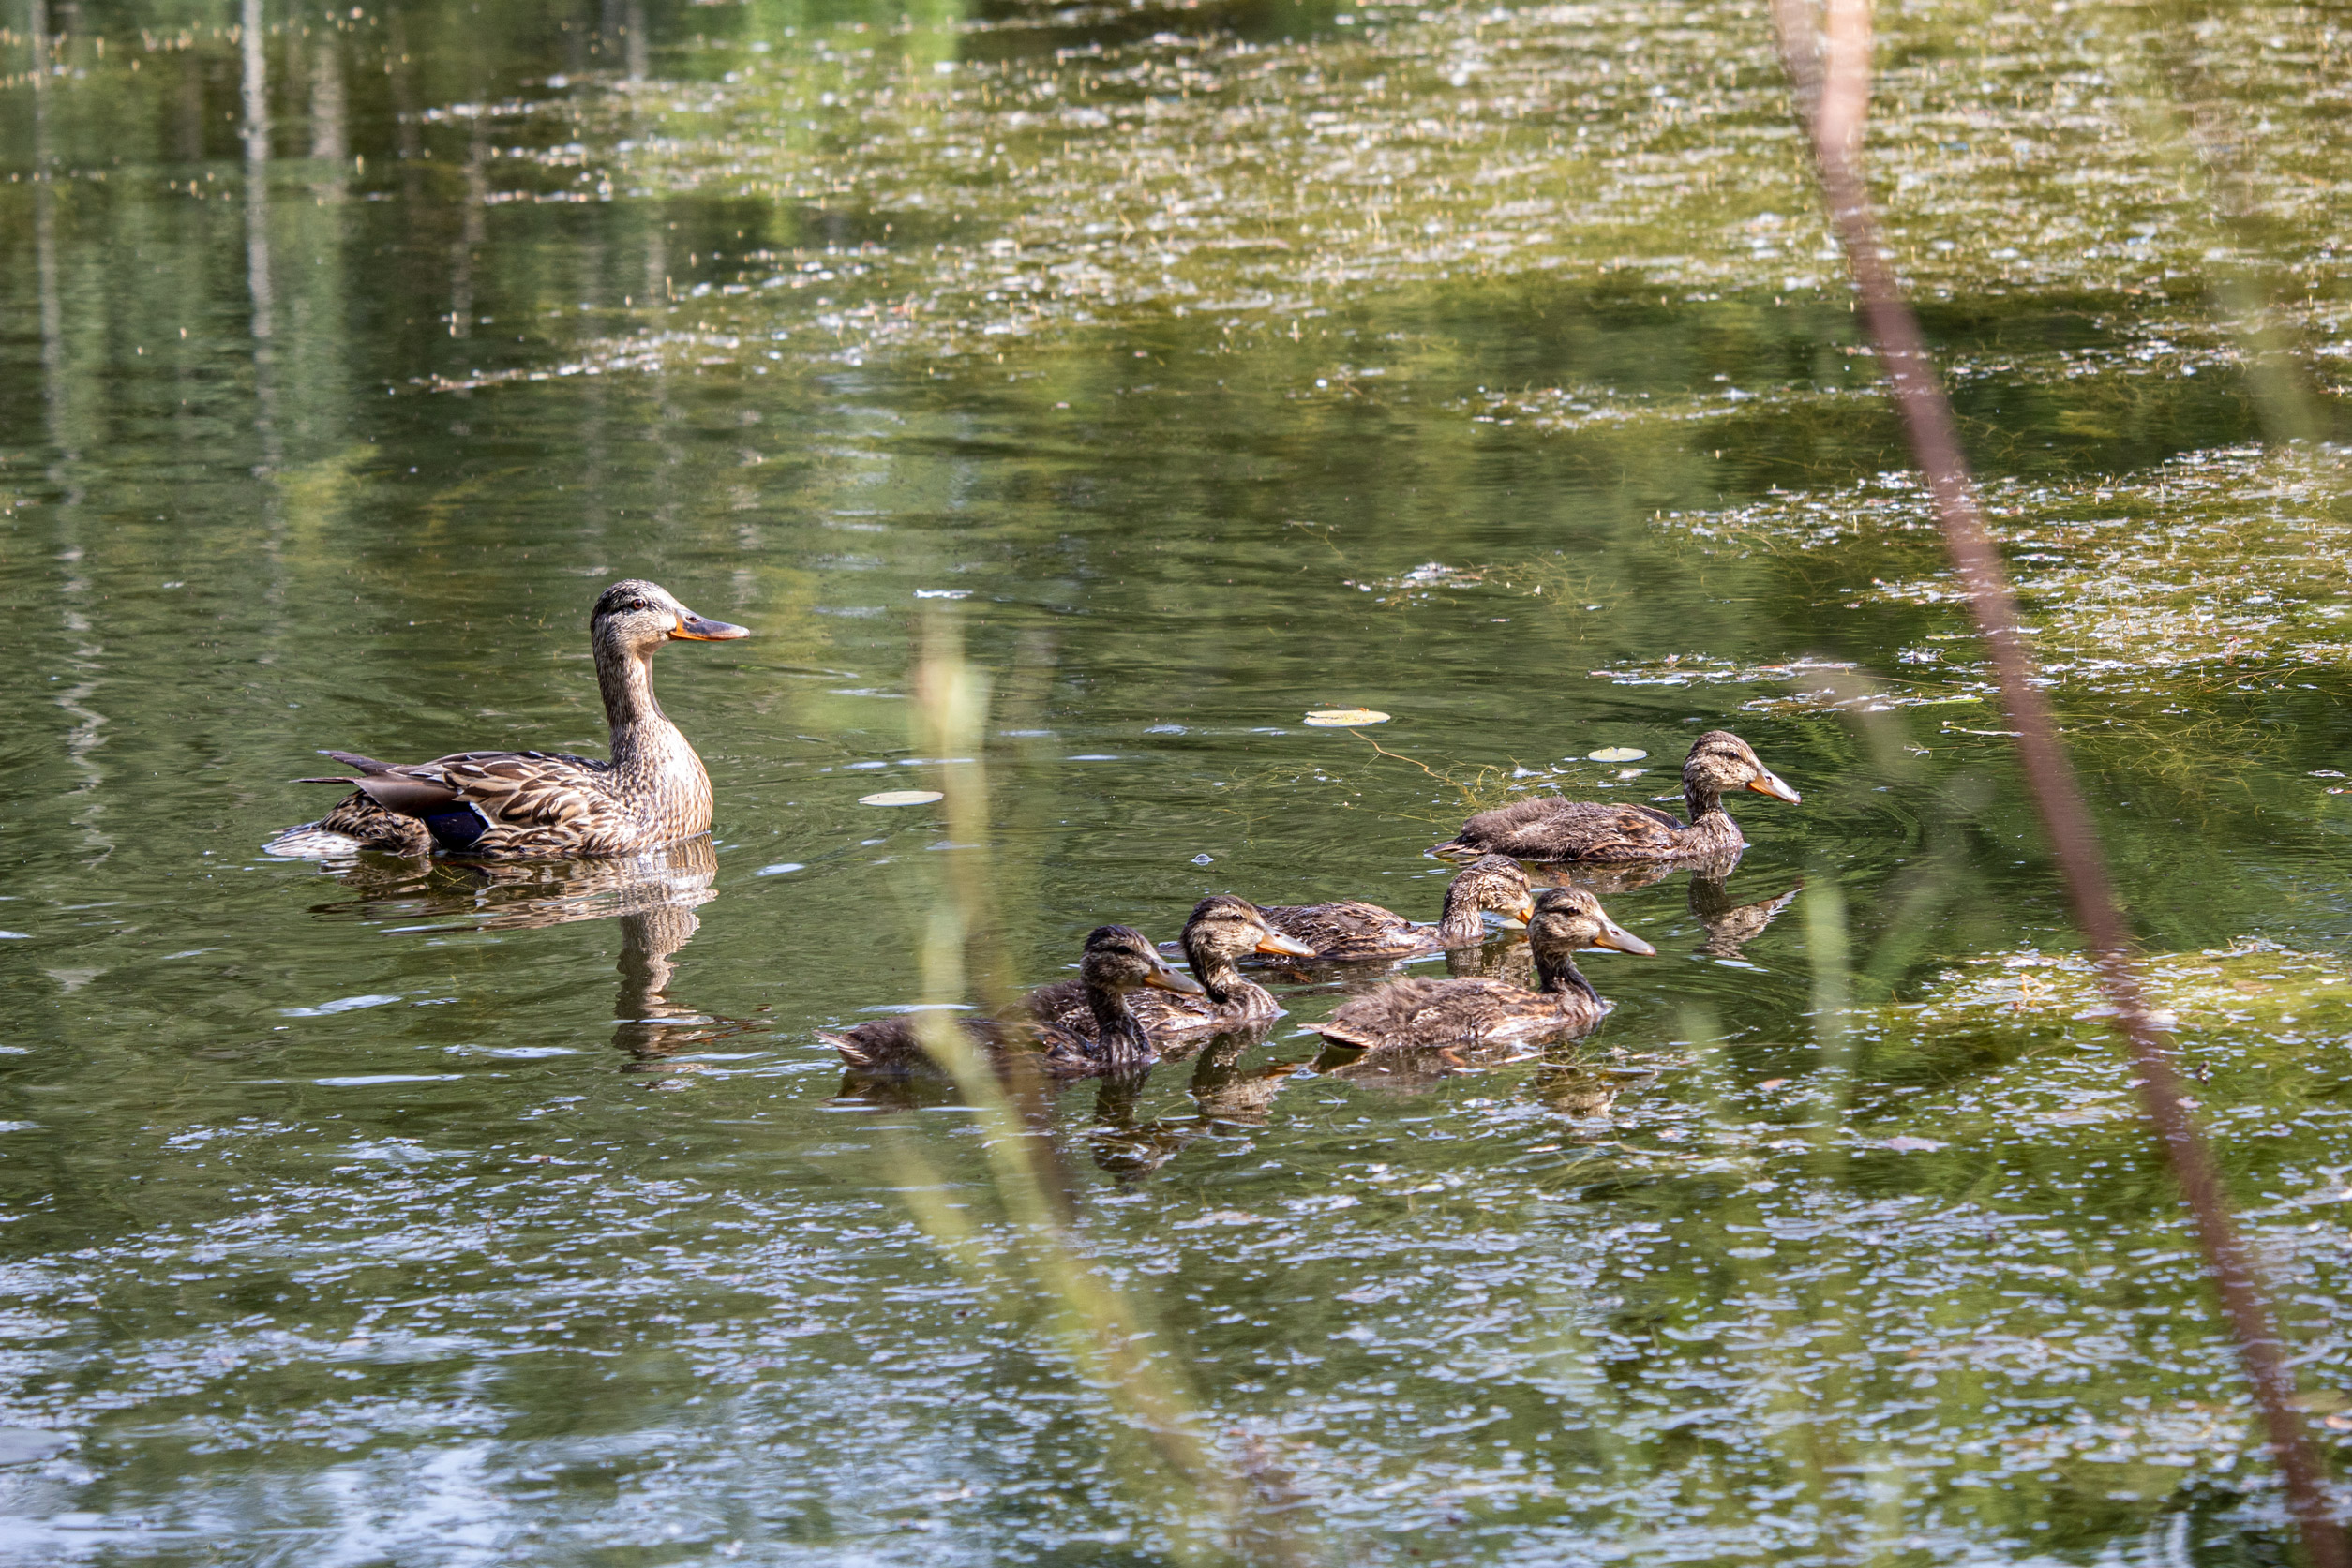 Momma duck and five ducklings floating on a lake